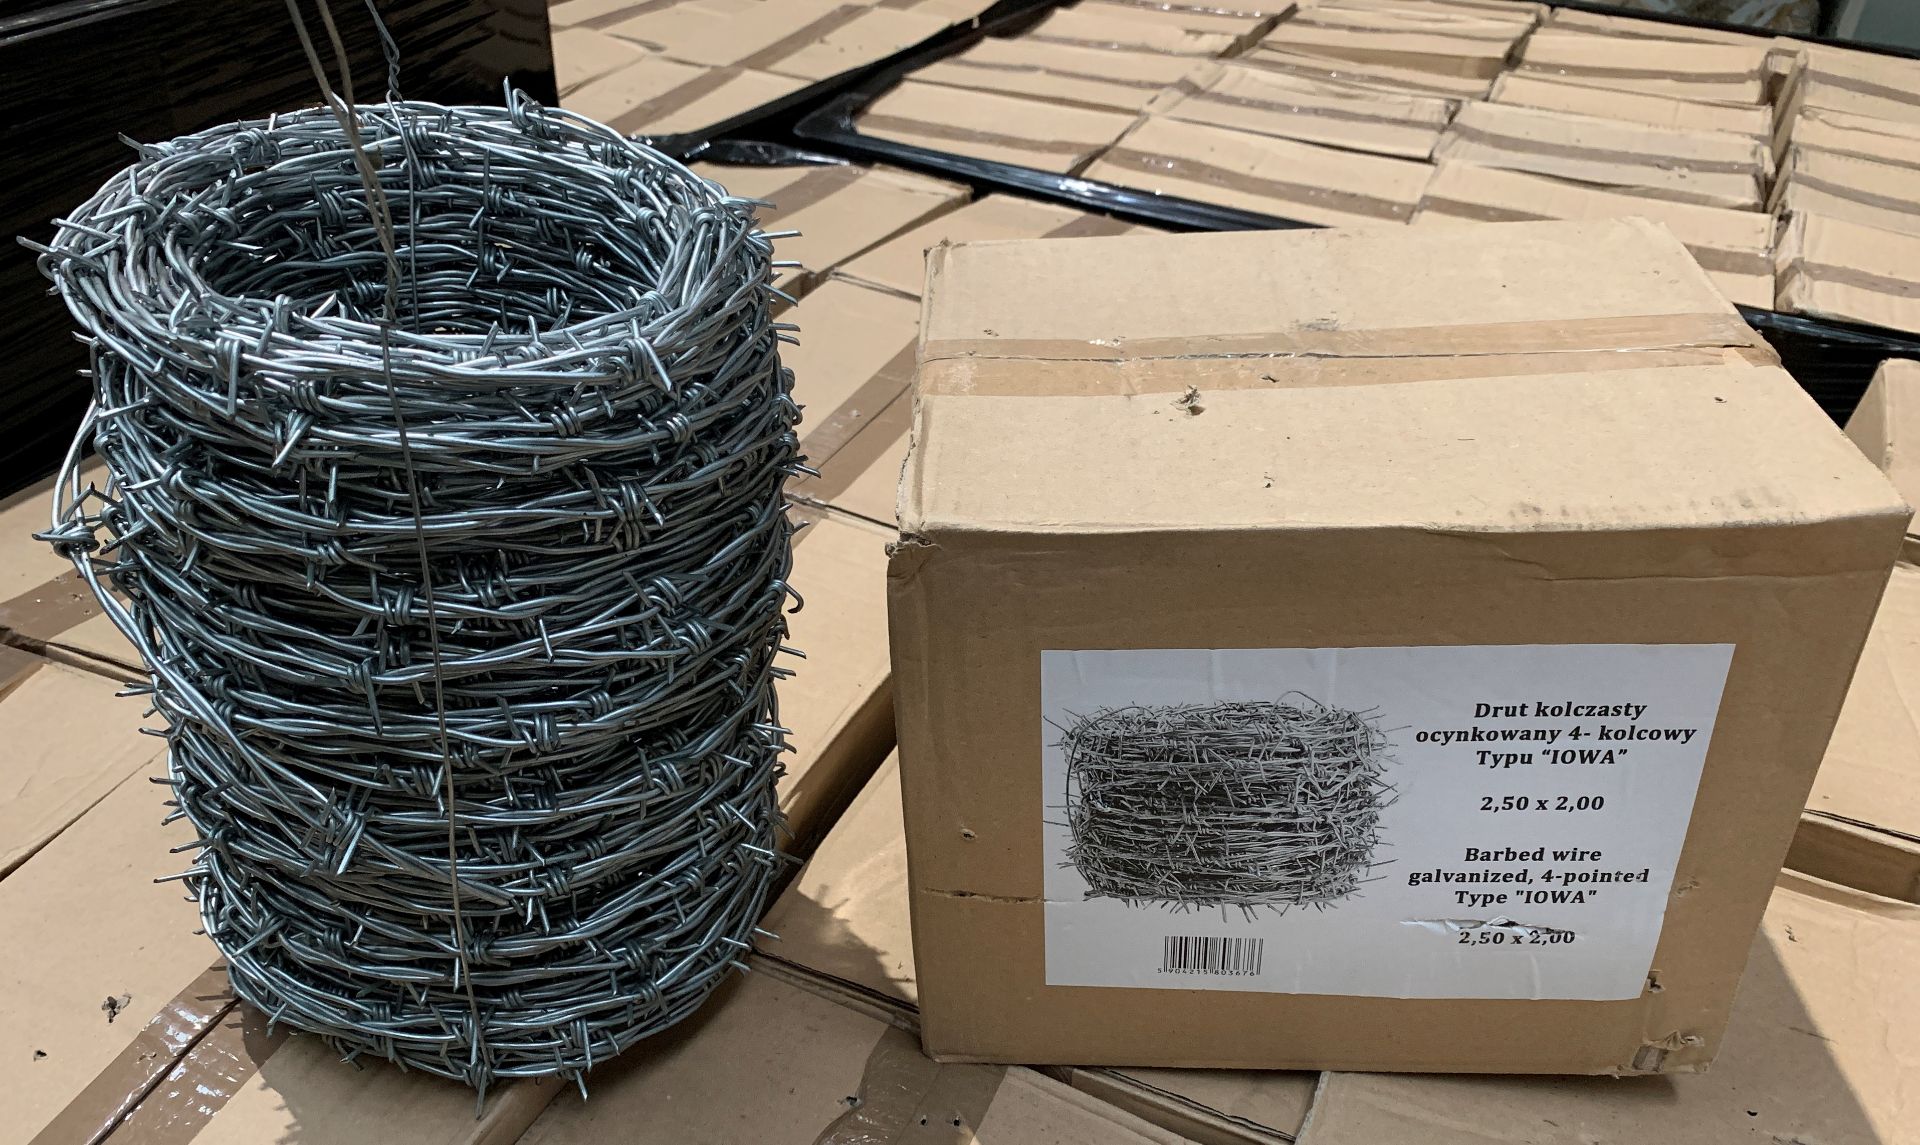 10 x boxes of barbed wire - each box containing a 2,50 x 2,